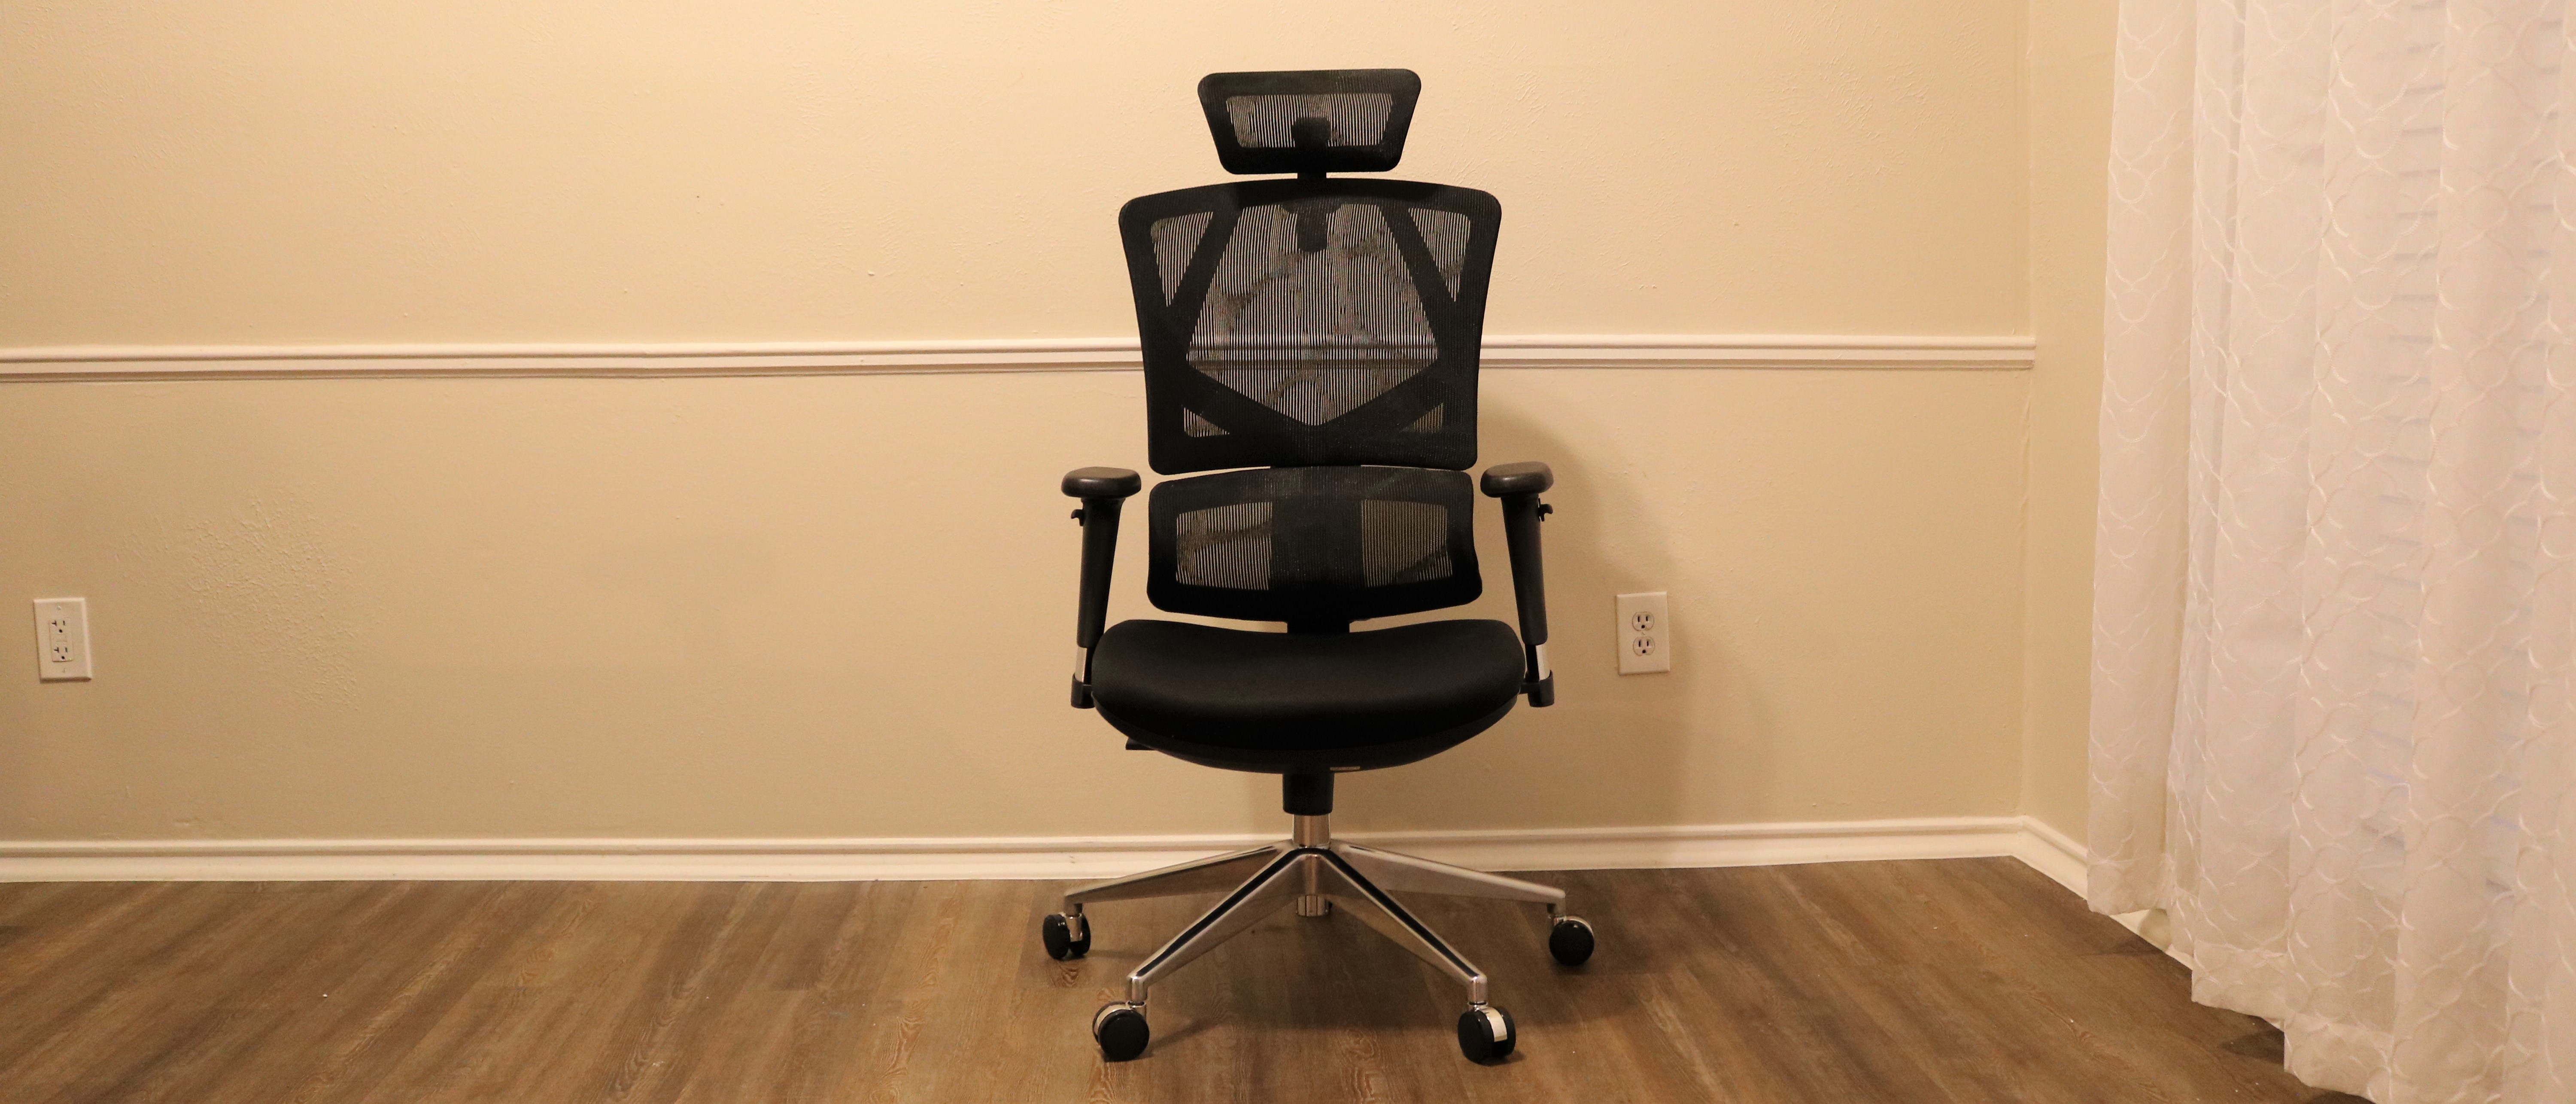 Sihoo M18 Chair Review - High Quality & Comfort Without the High Price Tag!  